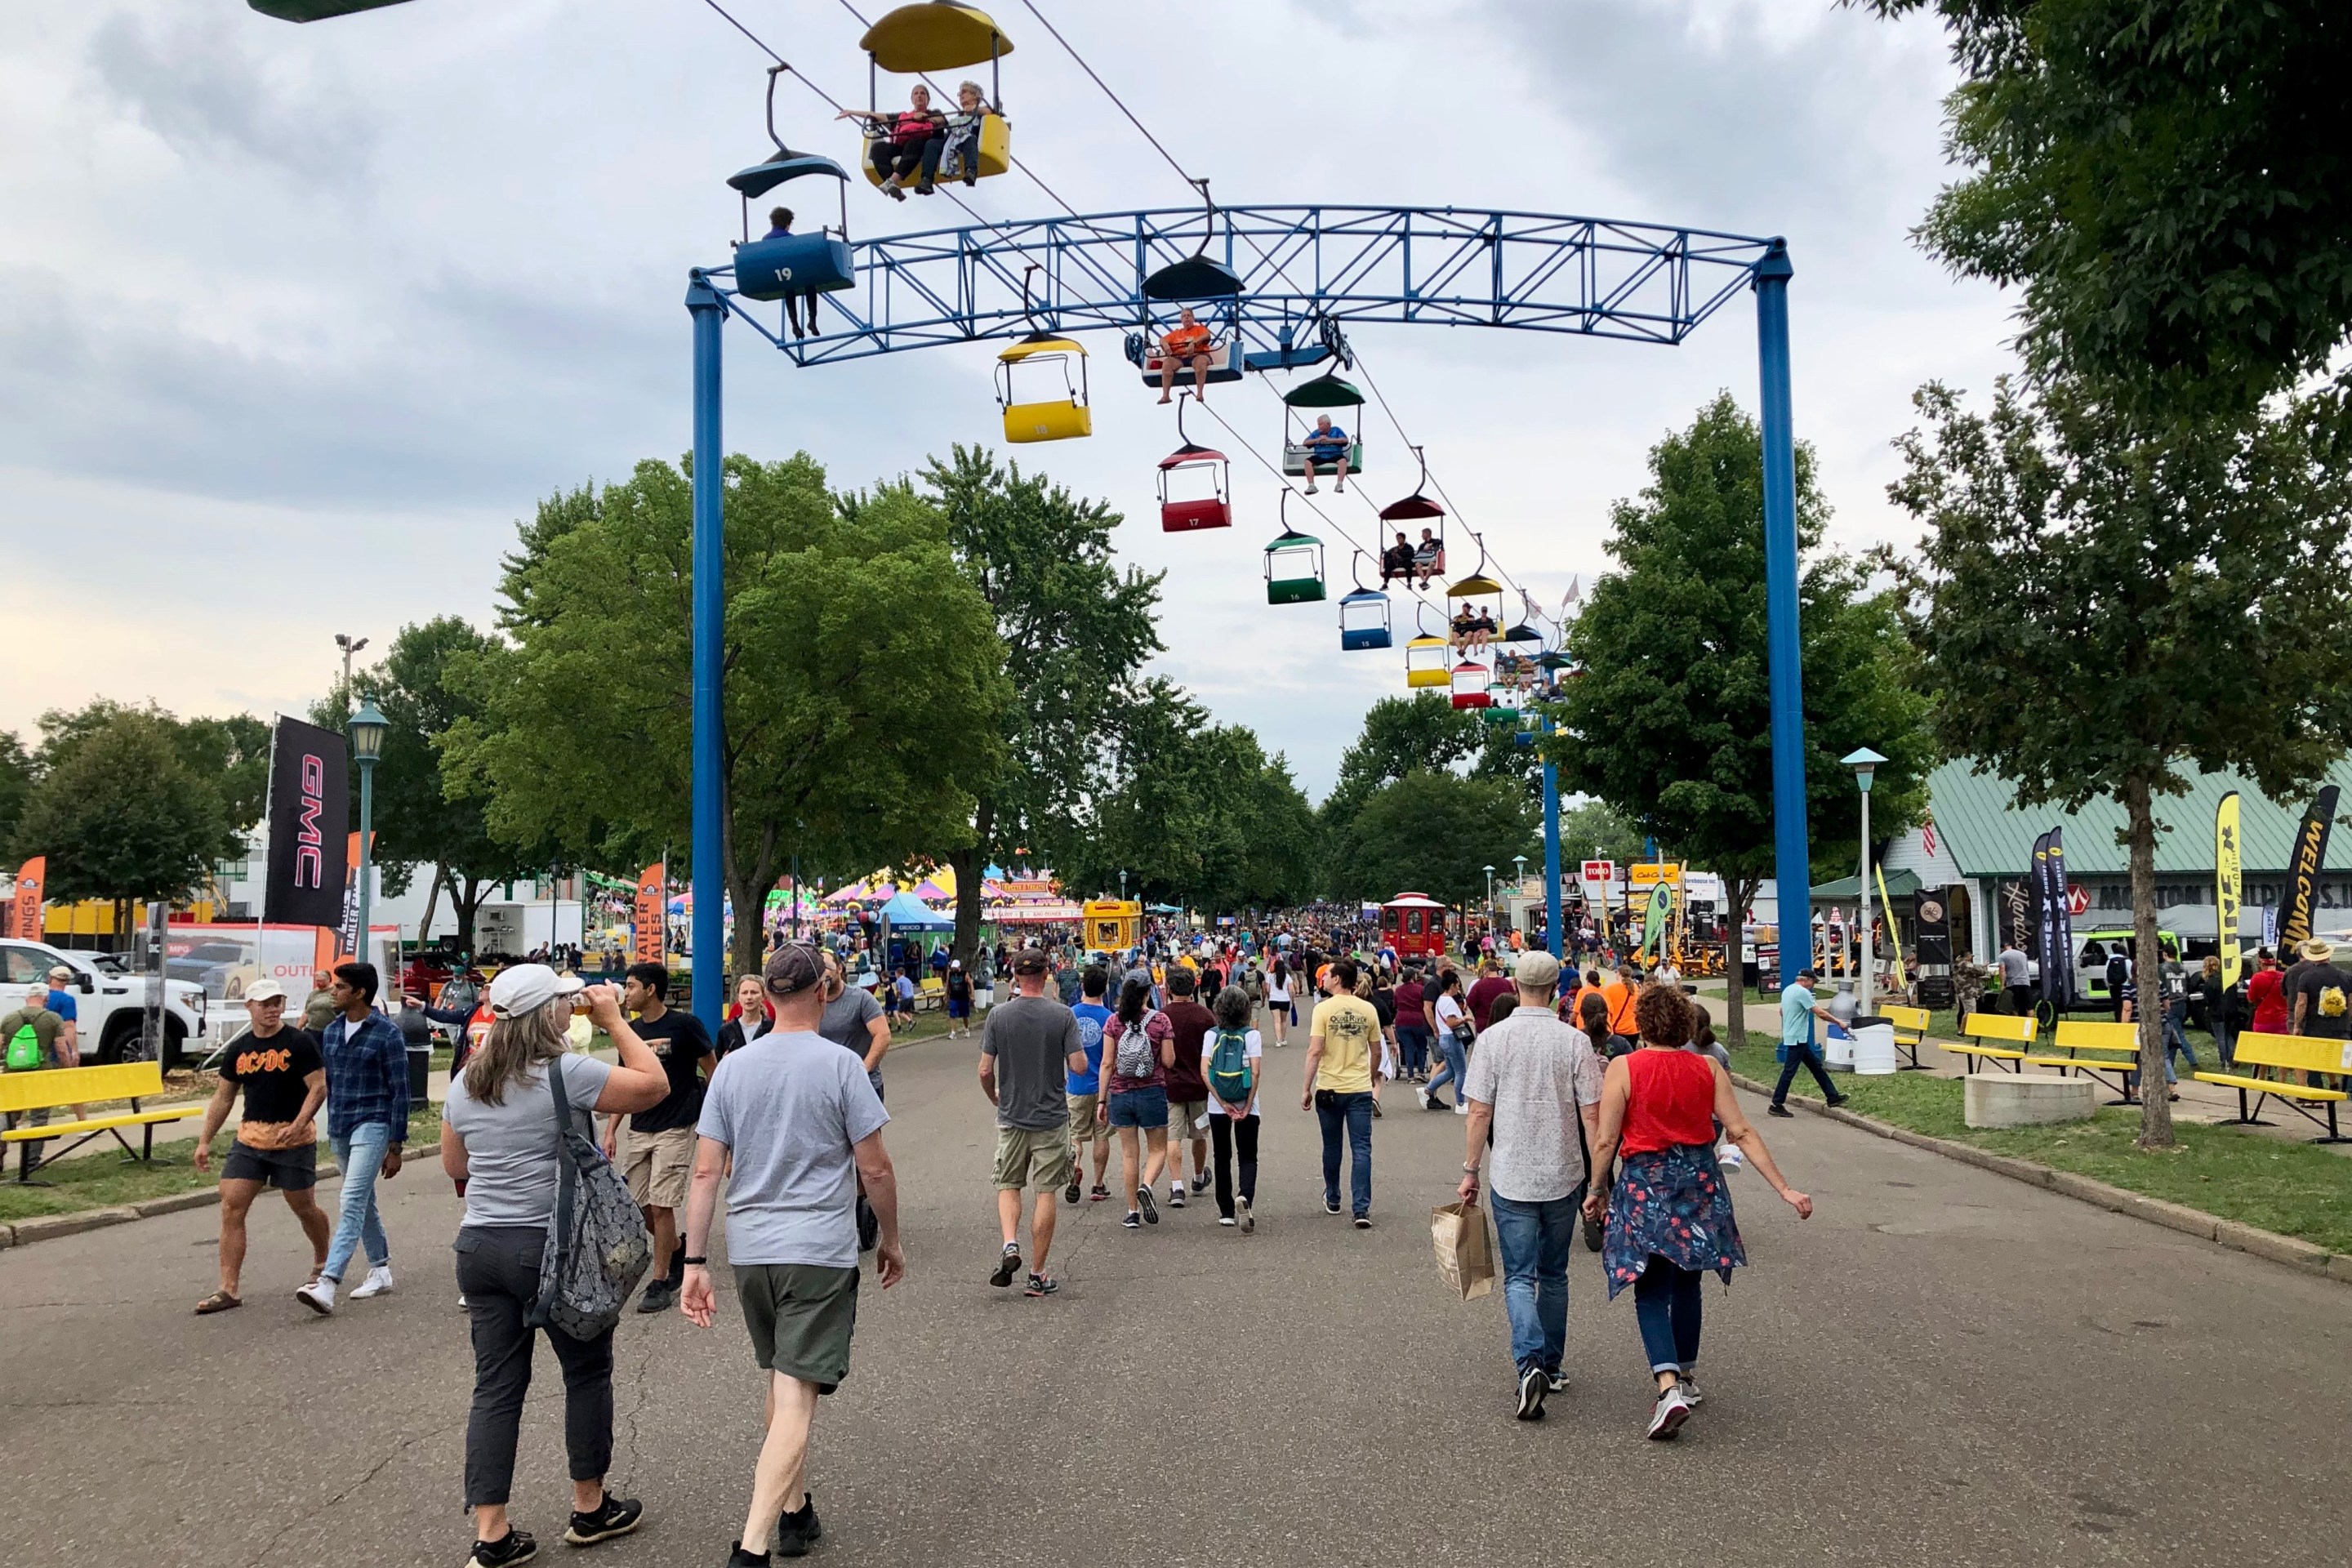 people walk below the sky ride at the state fair